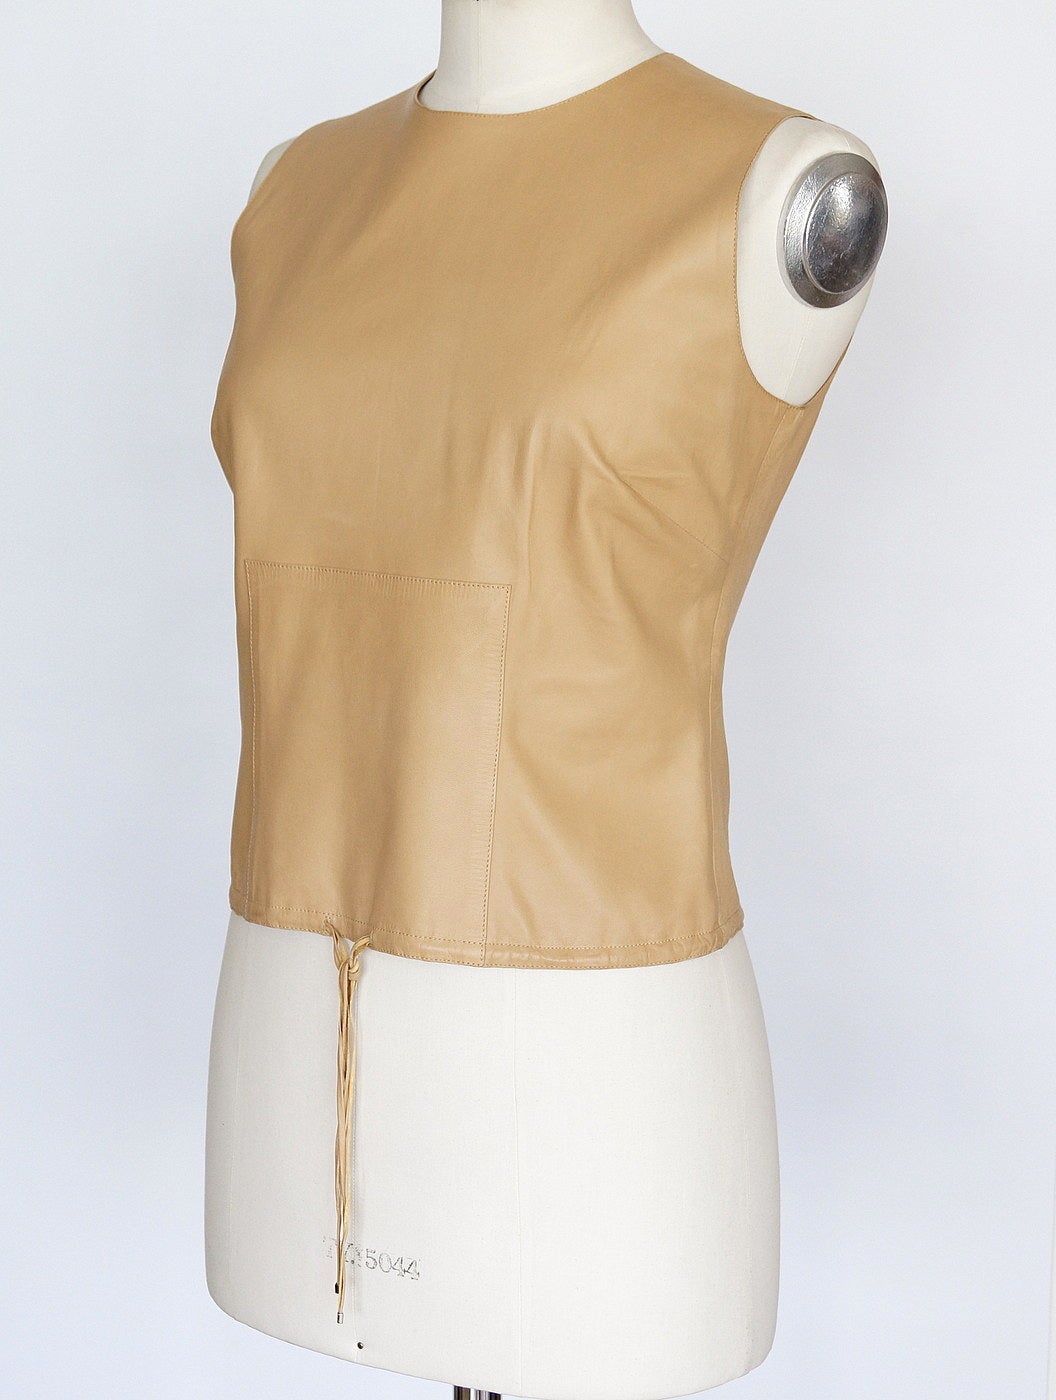 Guaranteed authentic Gucci by Tom Ford fabulous leather top. 
Round neck buttery leather in a warm camel nude tone.
Hem has soft subtle drawstring with leather detail in front of top.
Small silver tips at end of ties.
Rear hidden zipper for easy